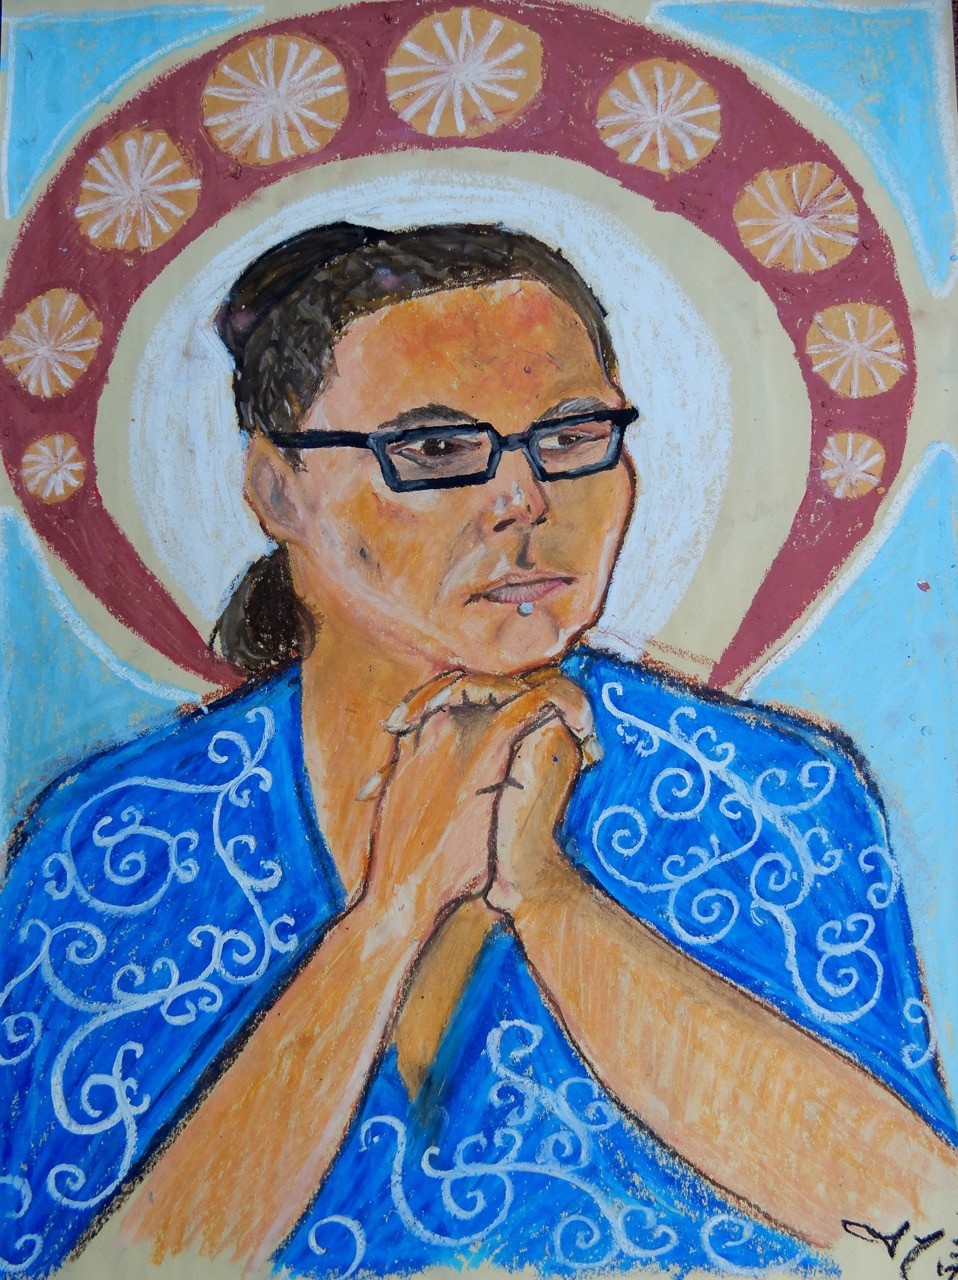 A drawing of an older woman. She has dark hair pulled back from her face, glasses, a bright blue dress with a white swirling pattern and a serious expression on her face. She is seated at a table with her hands folded up under her chin. There is a decoration, perhaps a mirror, on the wall behind her.